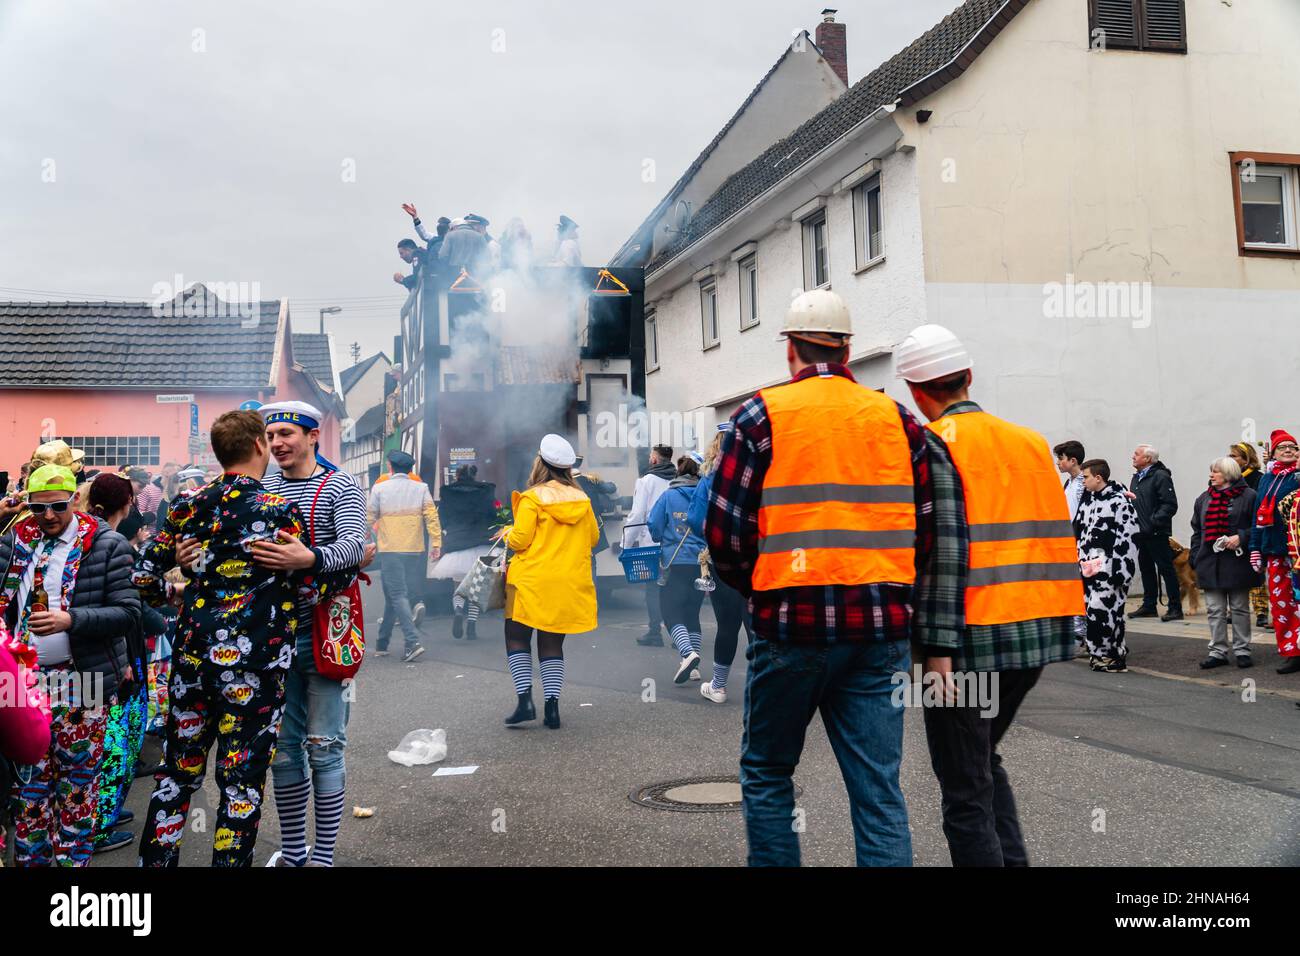 Bornheim, North Rhine-Westphalia, Germany - February 22, 2020: Two men in costumes celebrating friendship during the traditional carnival parade Stock Photo